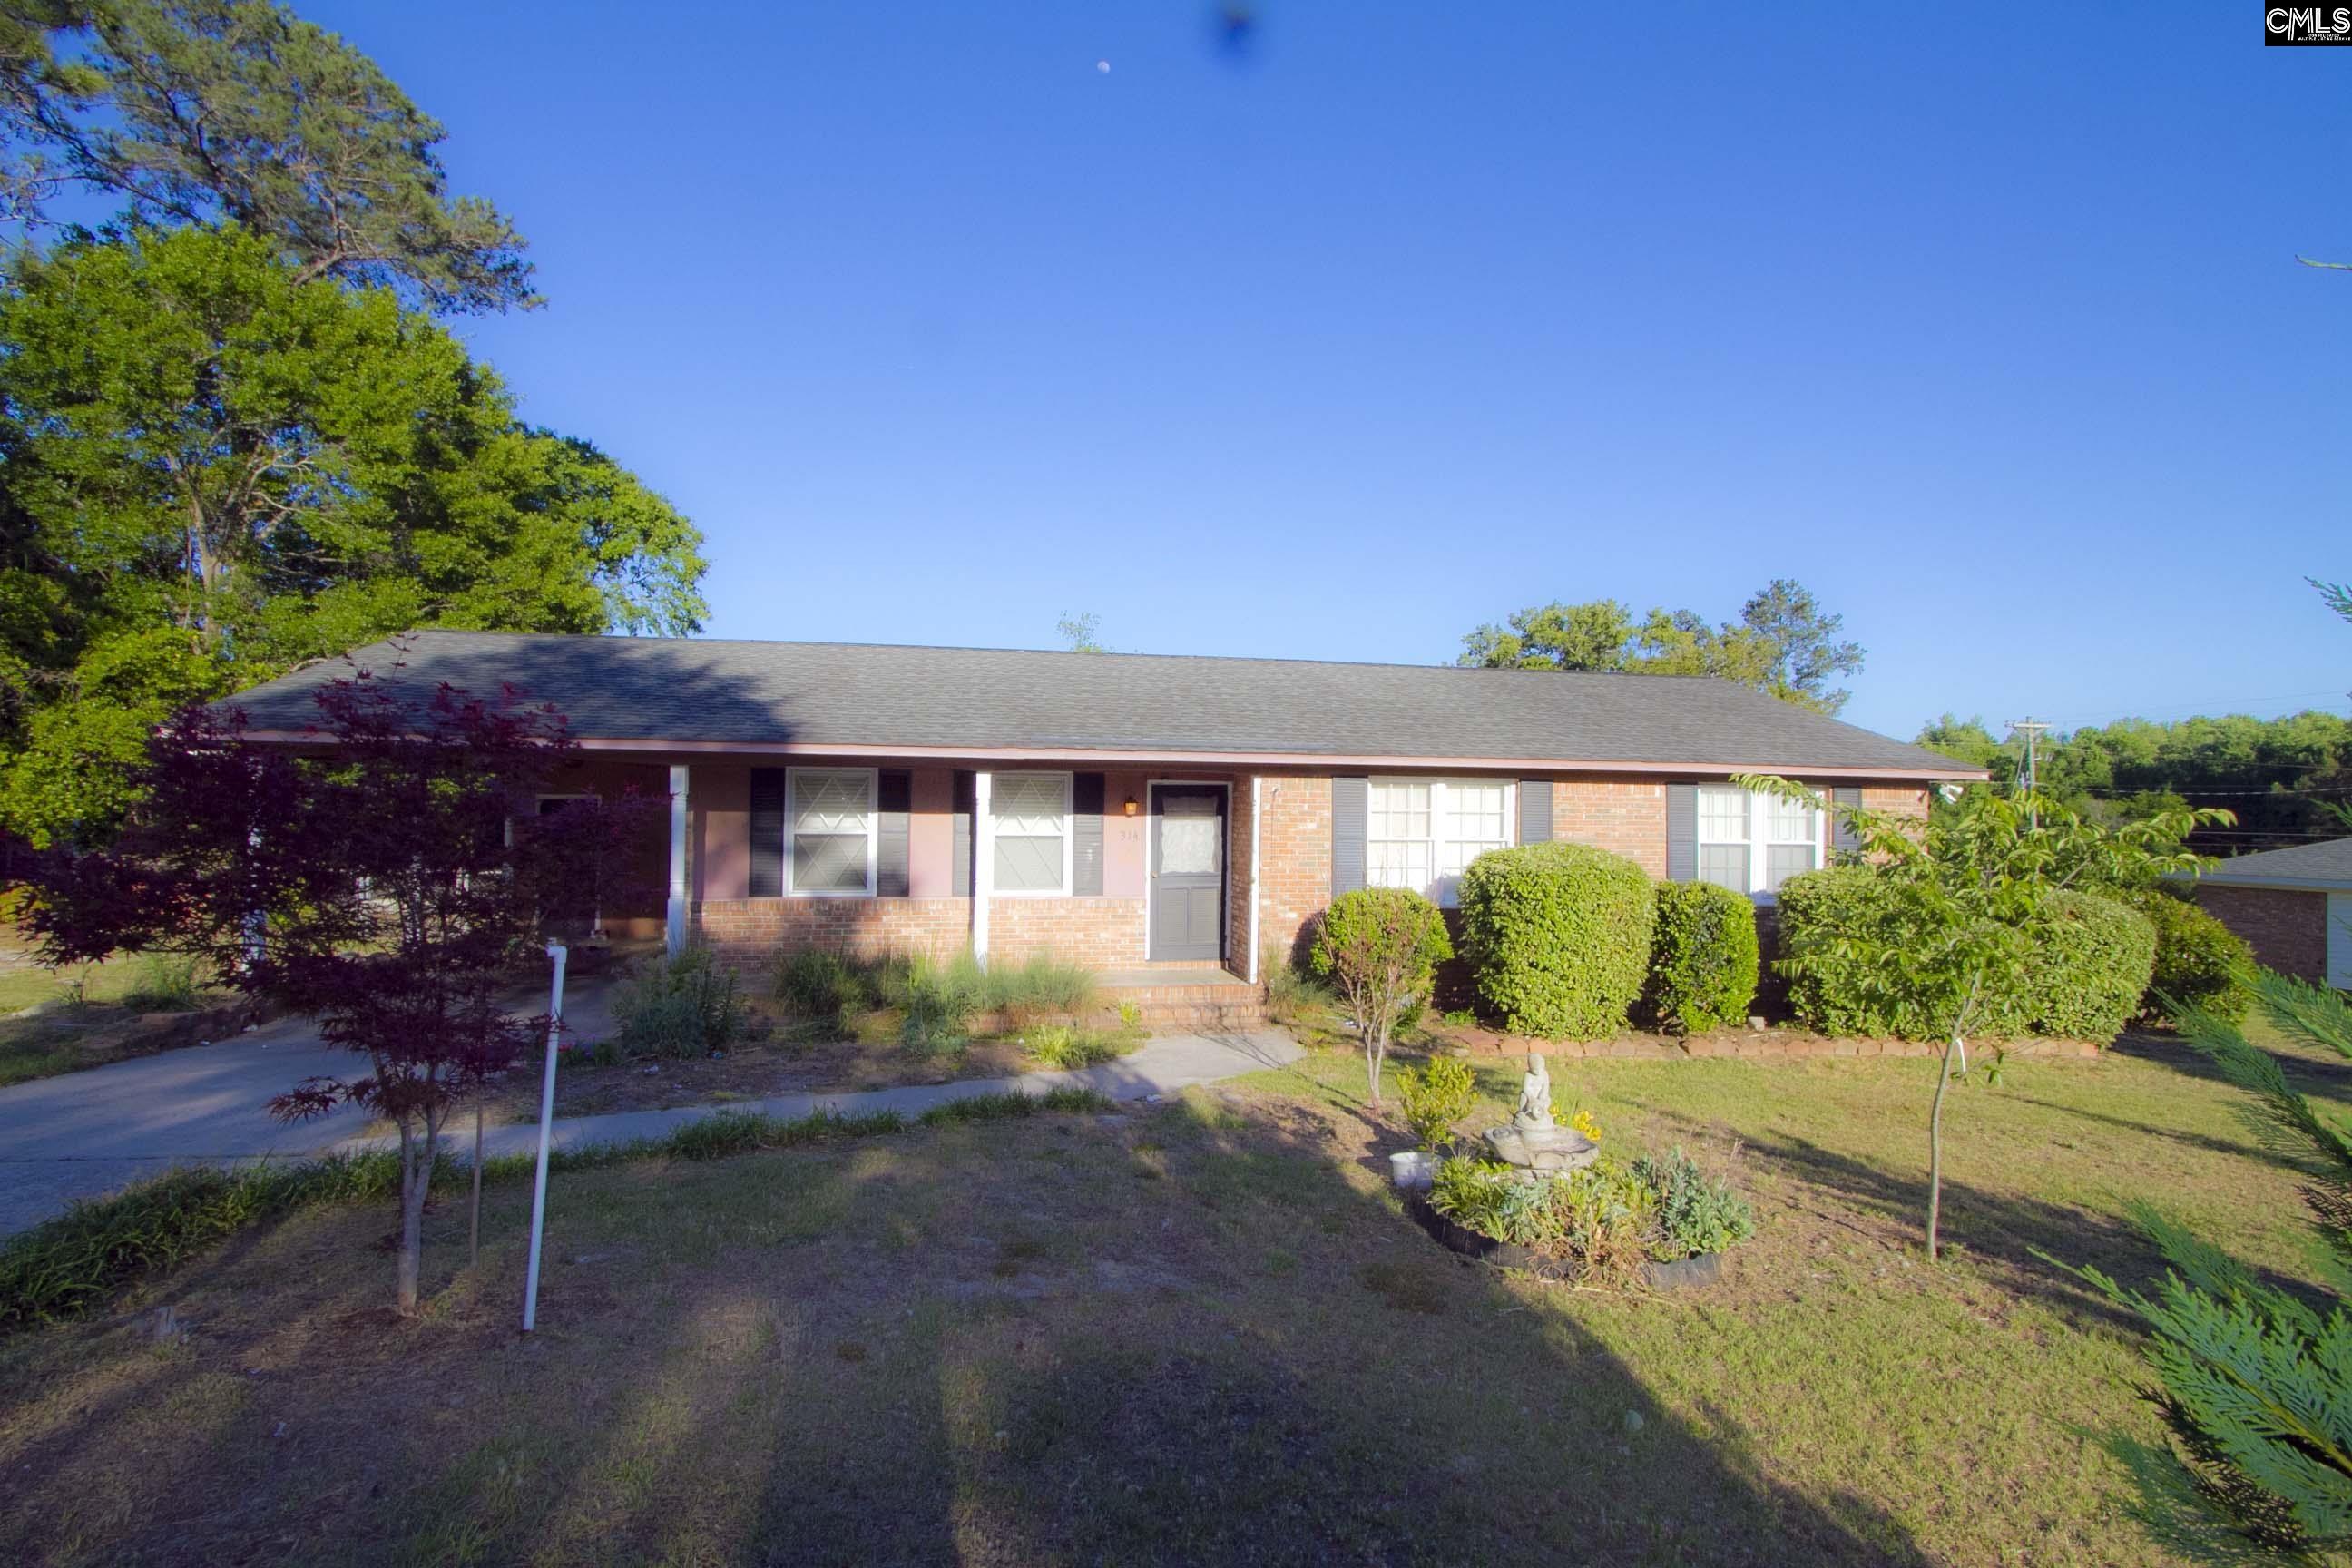 314 Winshire Drive West Columbia, SC 29170